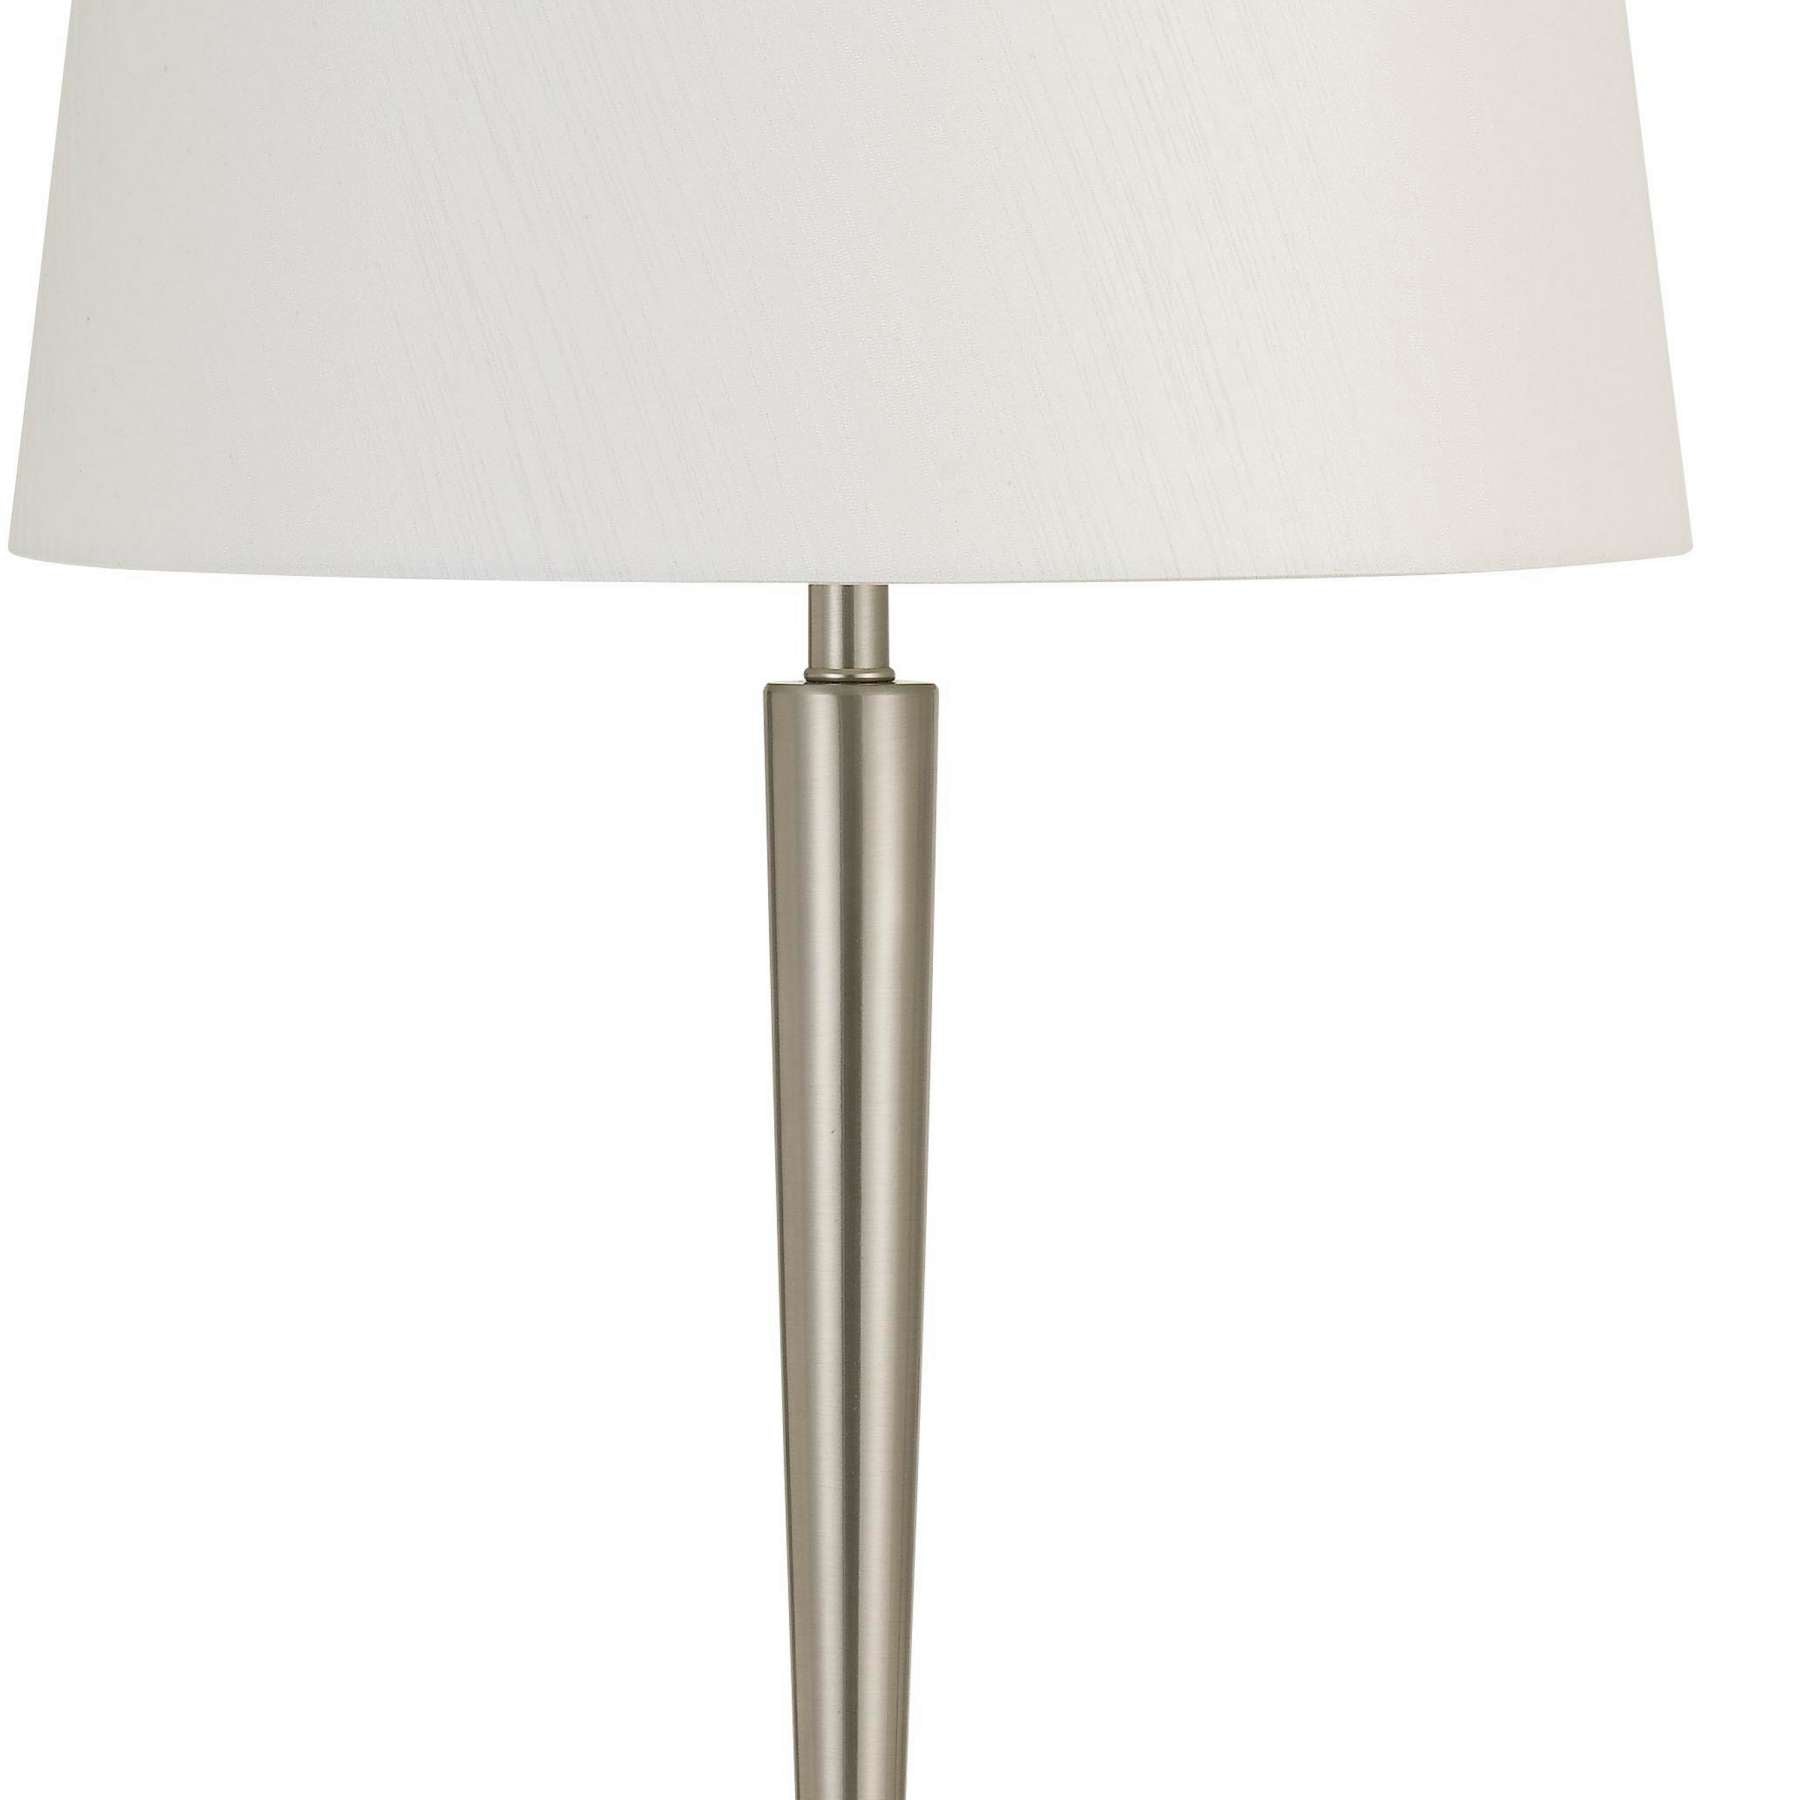 150W Metal Table Lamp With Oval Shade And 2 Usb Outlets, White And Silver By Benzara